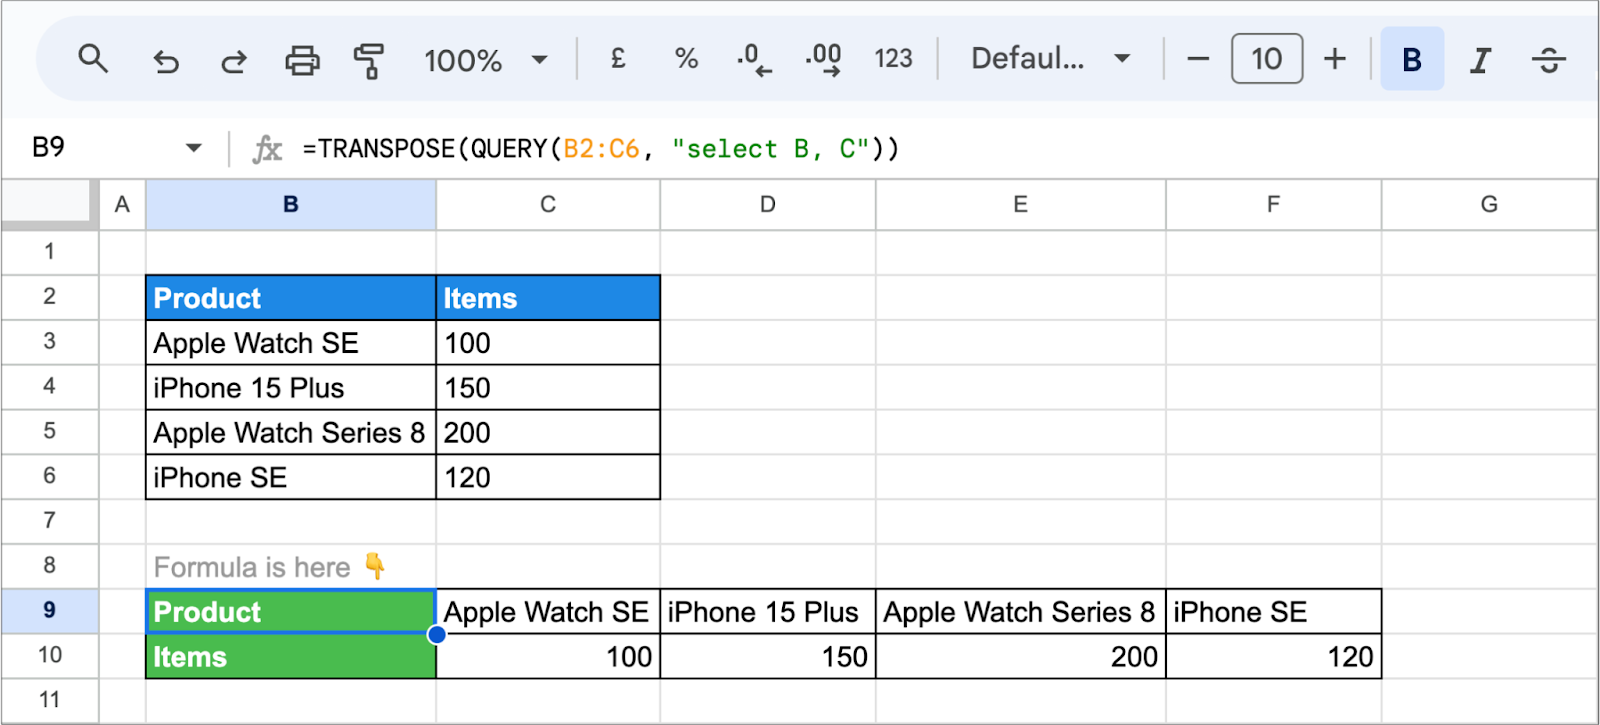 TRANSPOSE function to the QUERY results